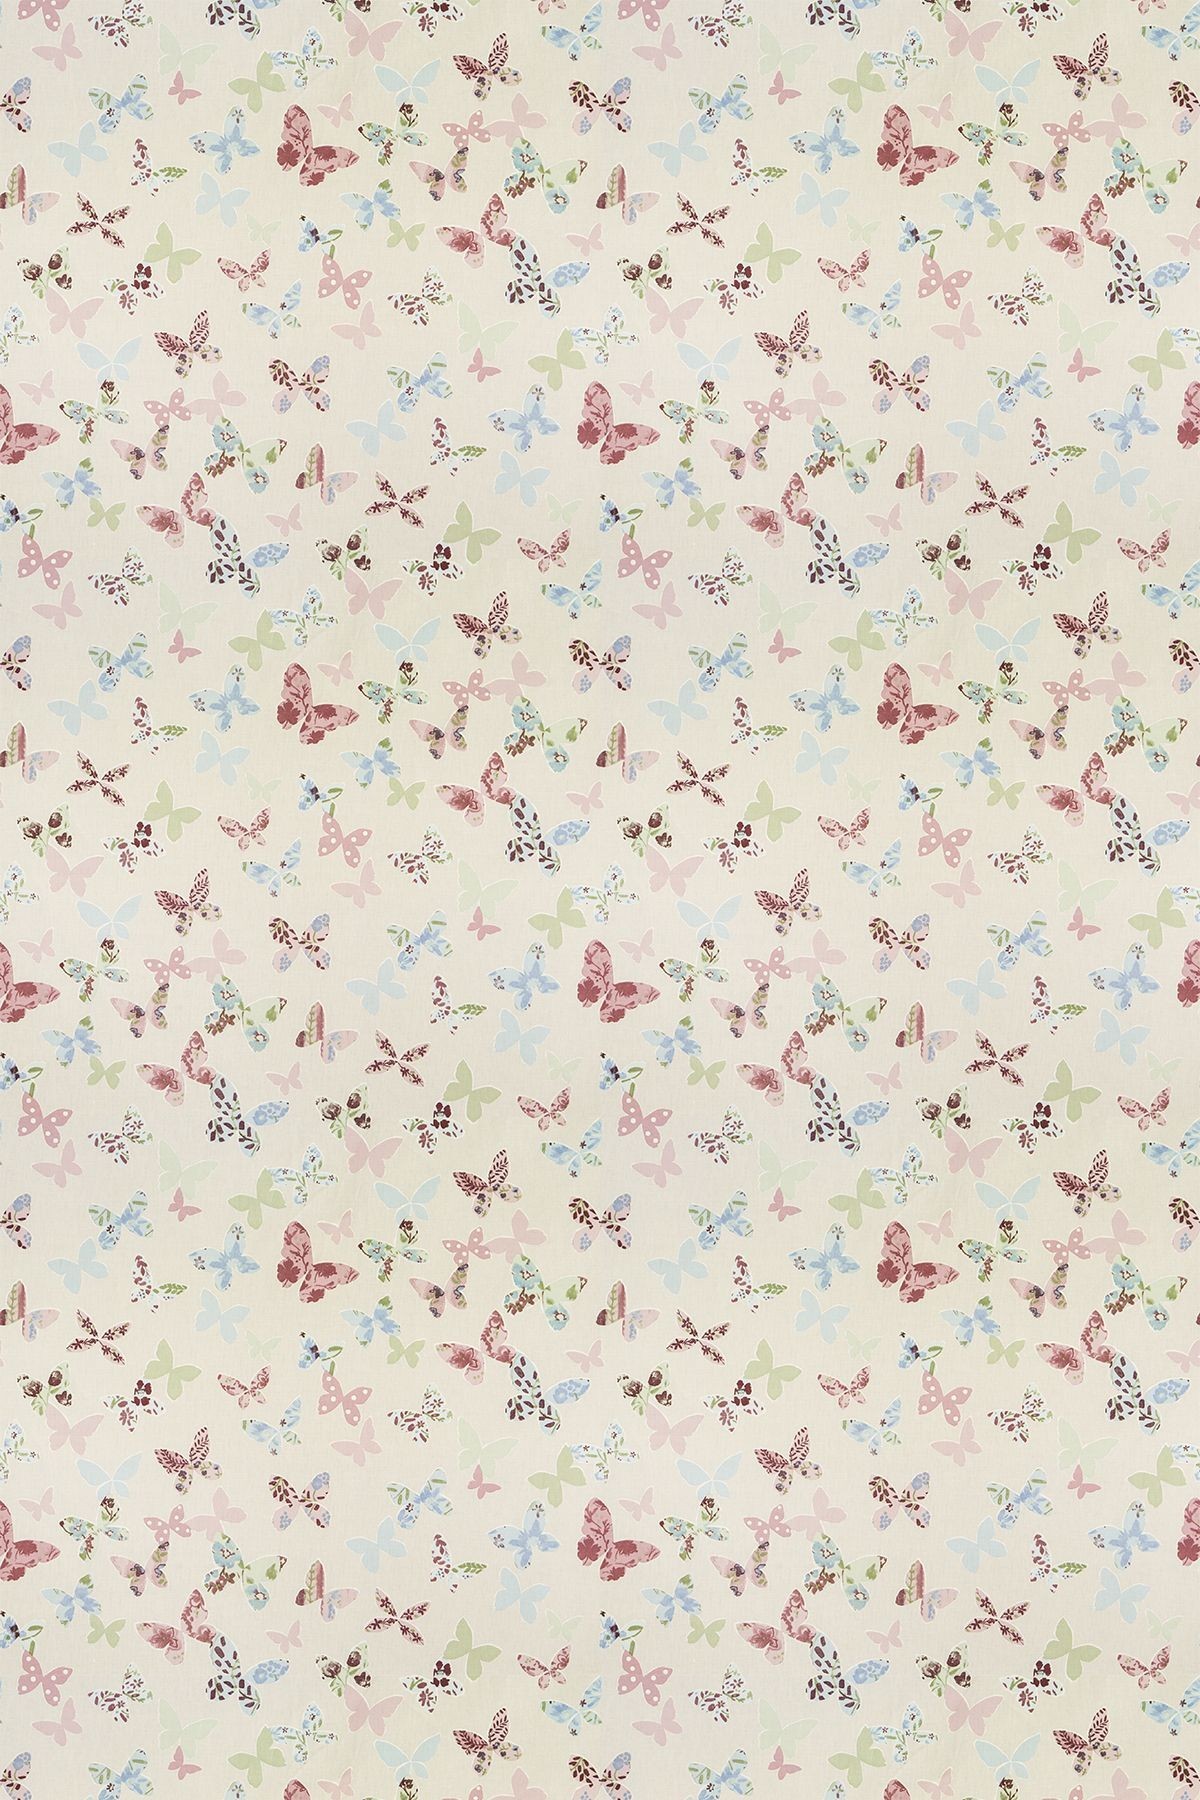 Patterned Tumblr Wallpapers